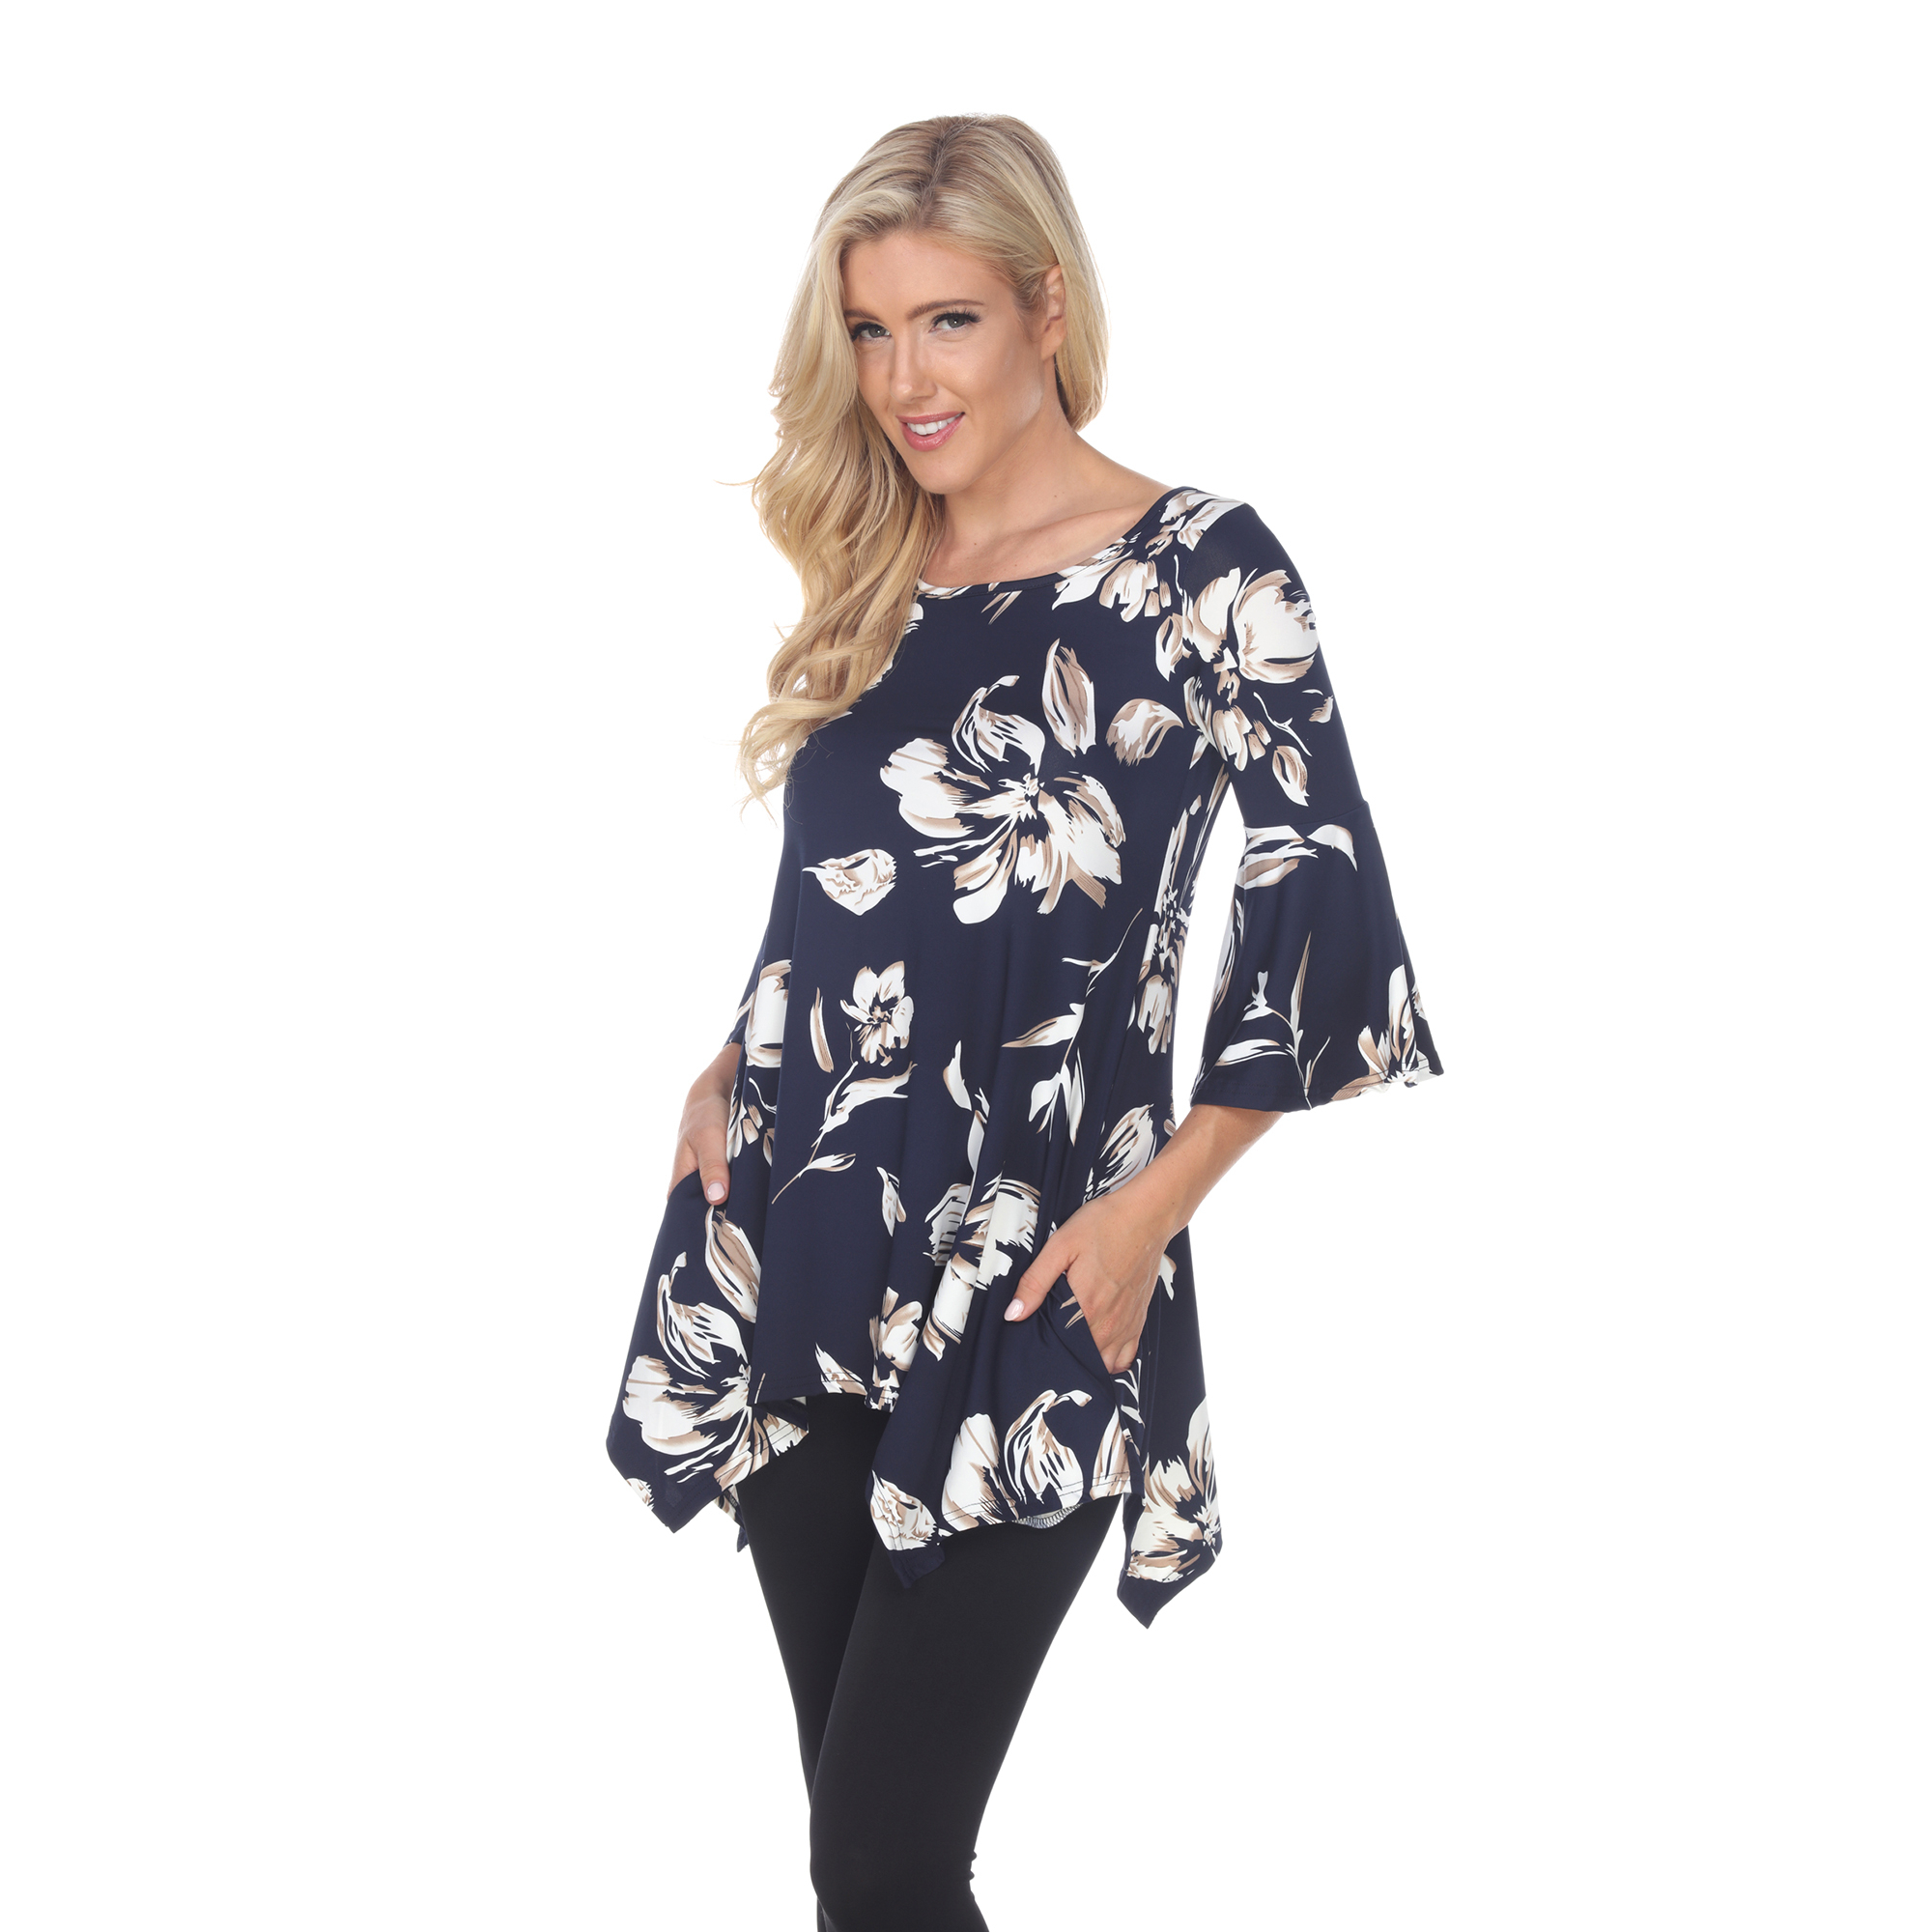 White Mark Women's Floral Print Quarter Sleeve Tunic Top With Pockets - Navy, Large